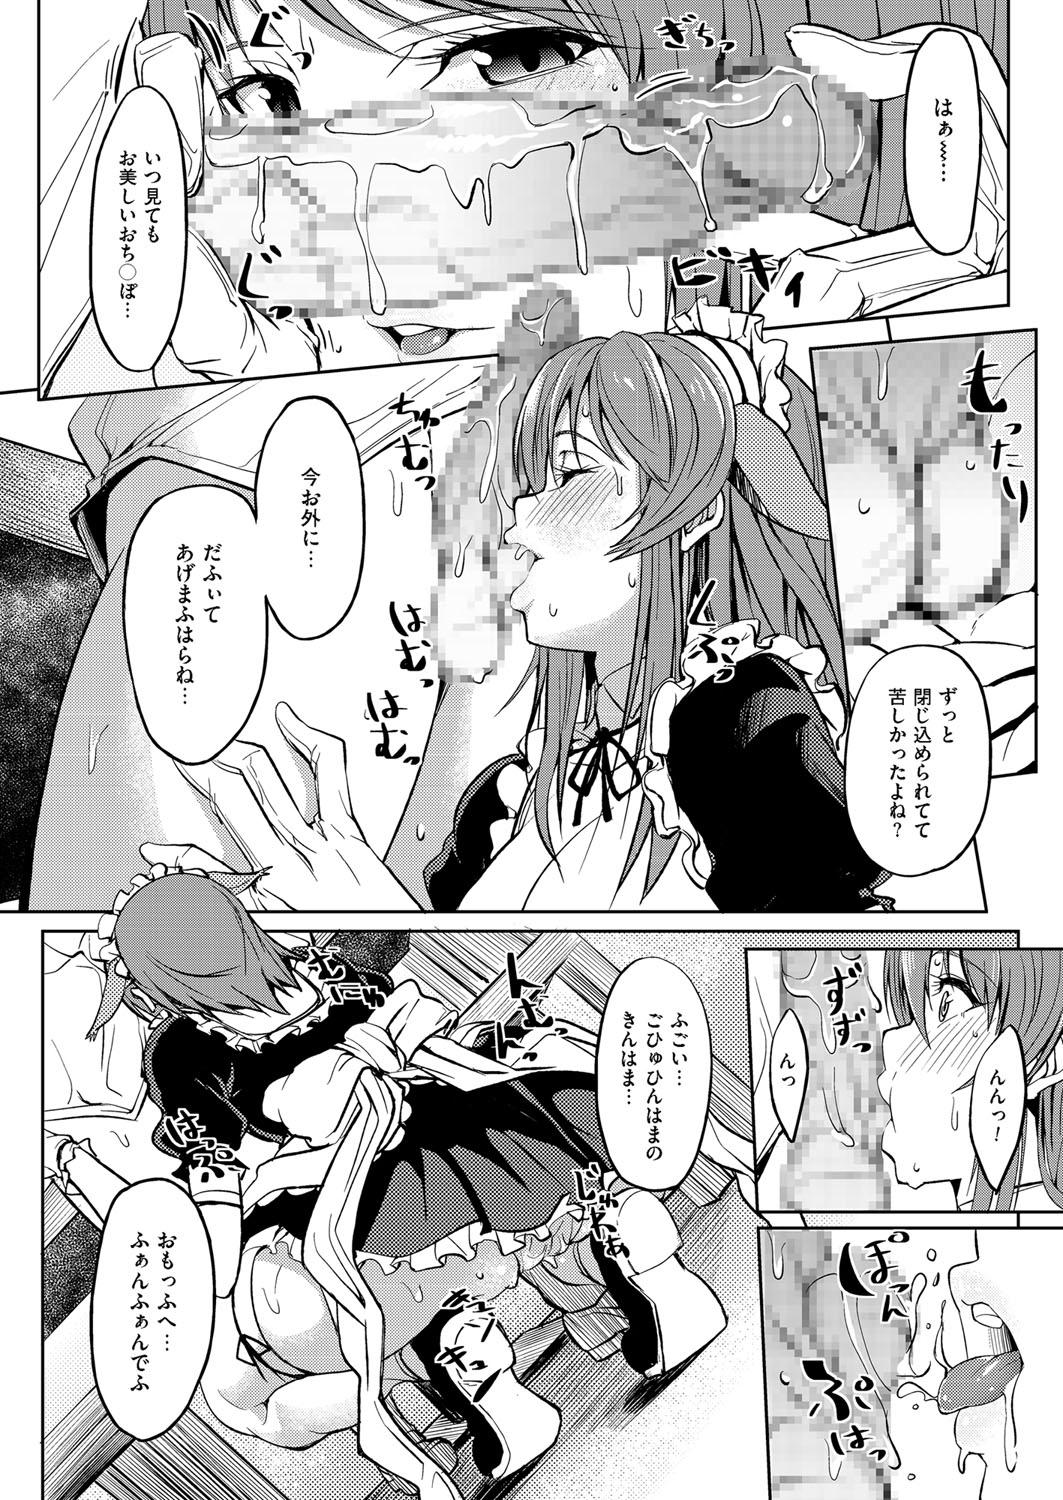 Guys Maid In Nyanko Baile - Page 8